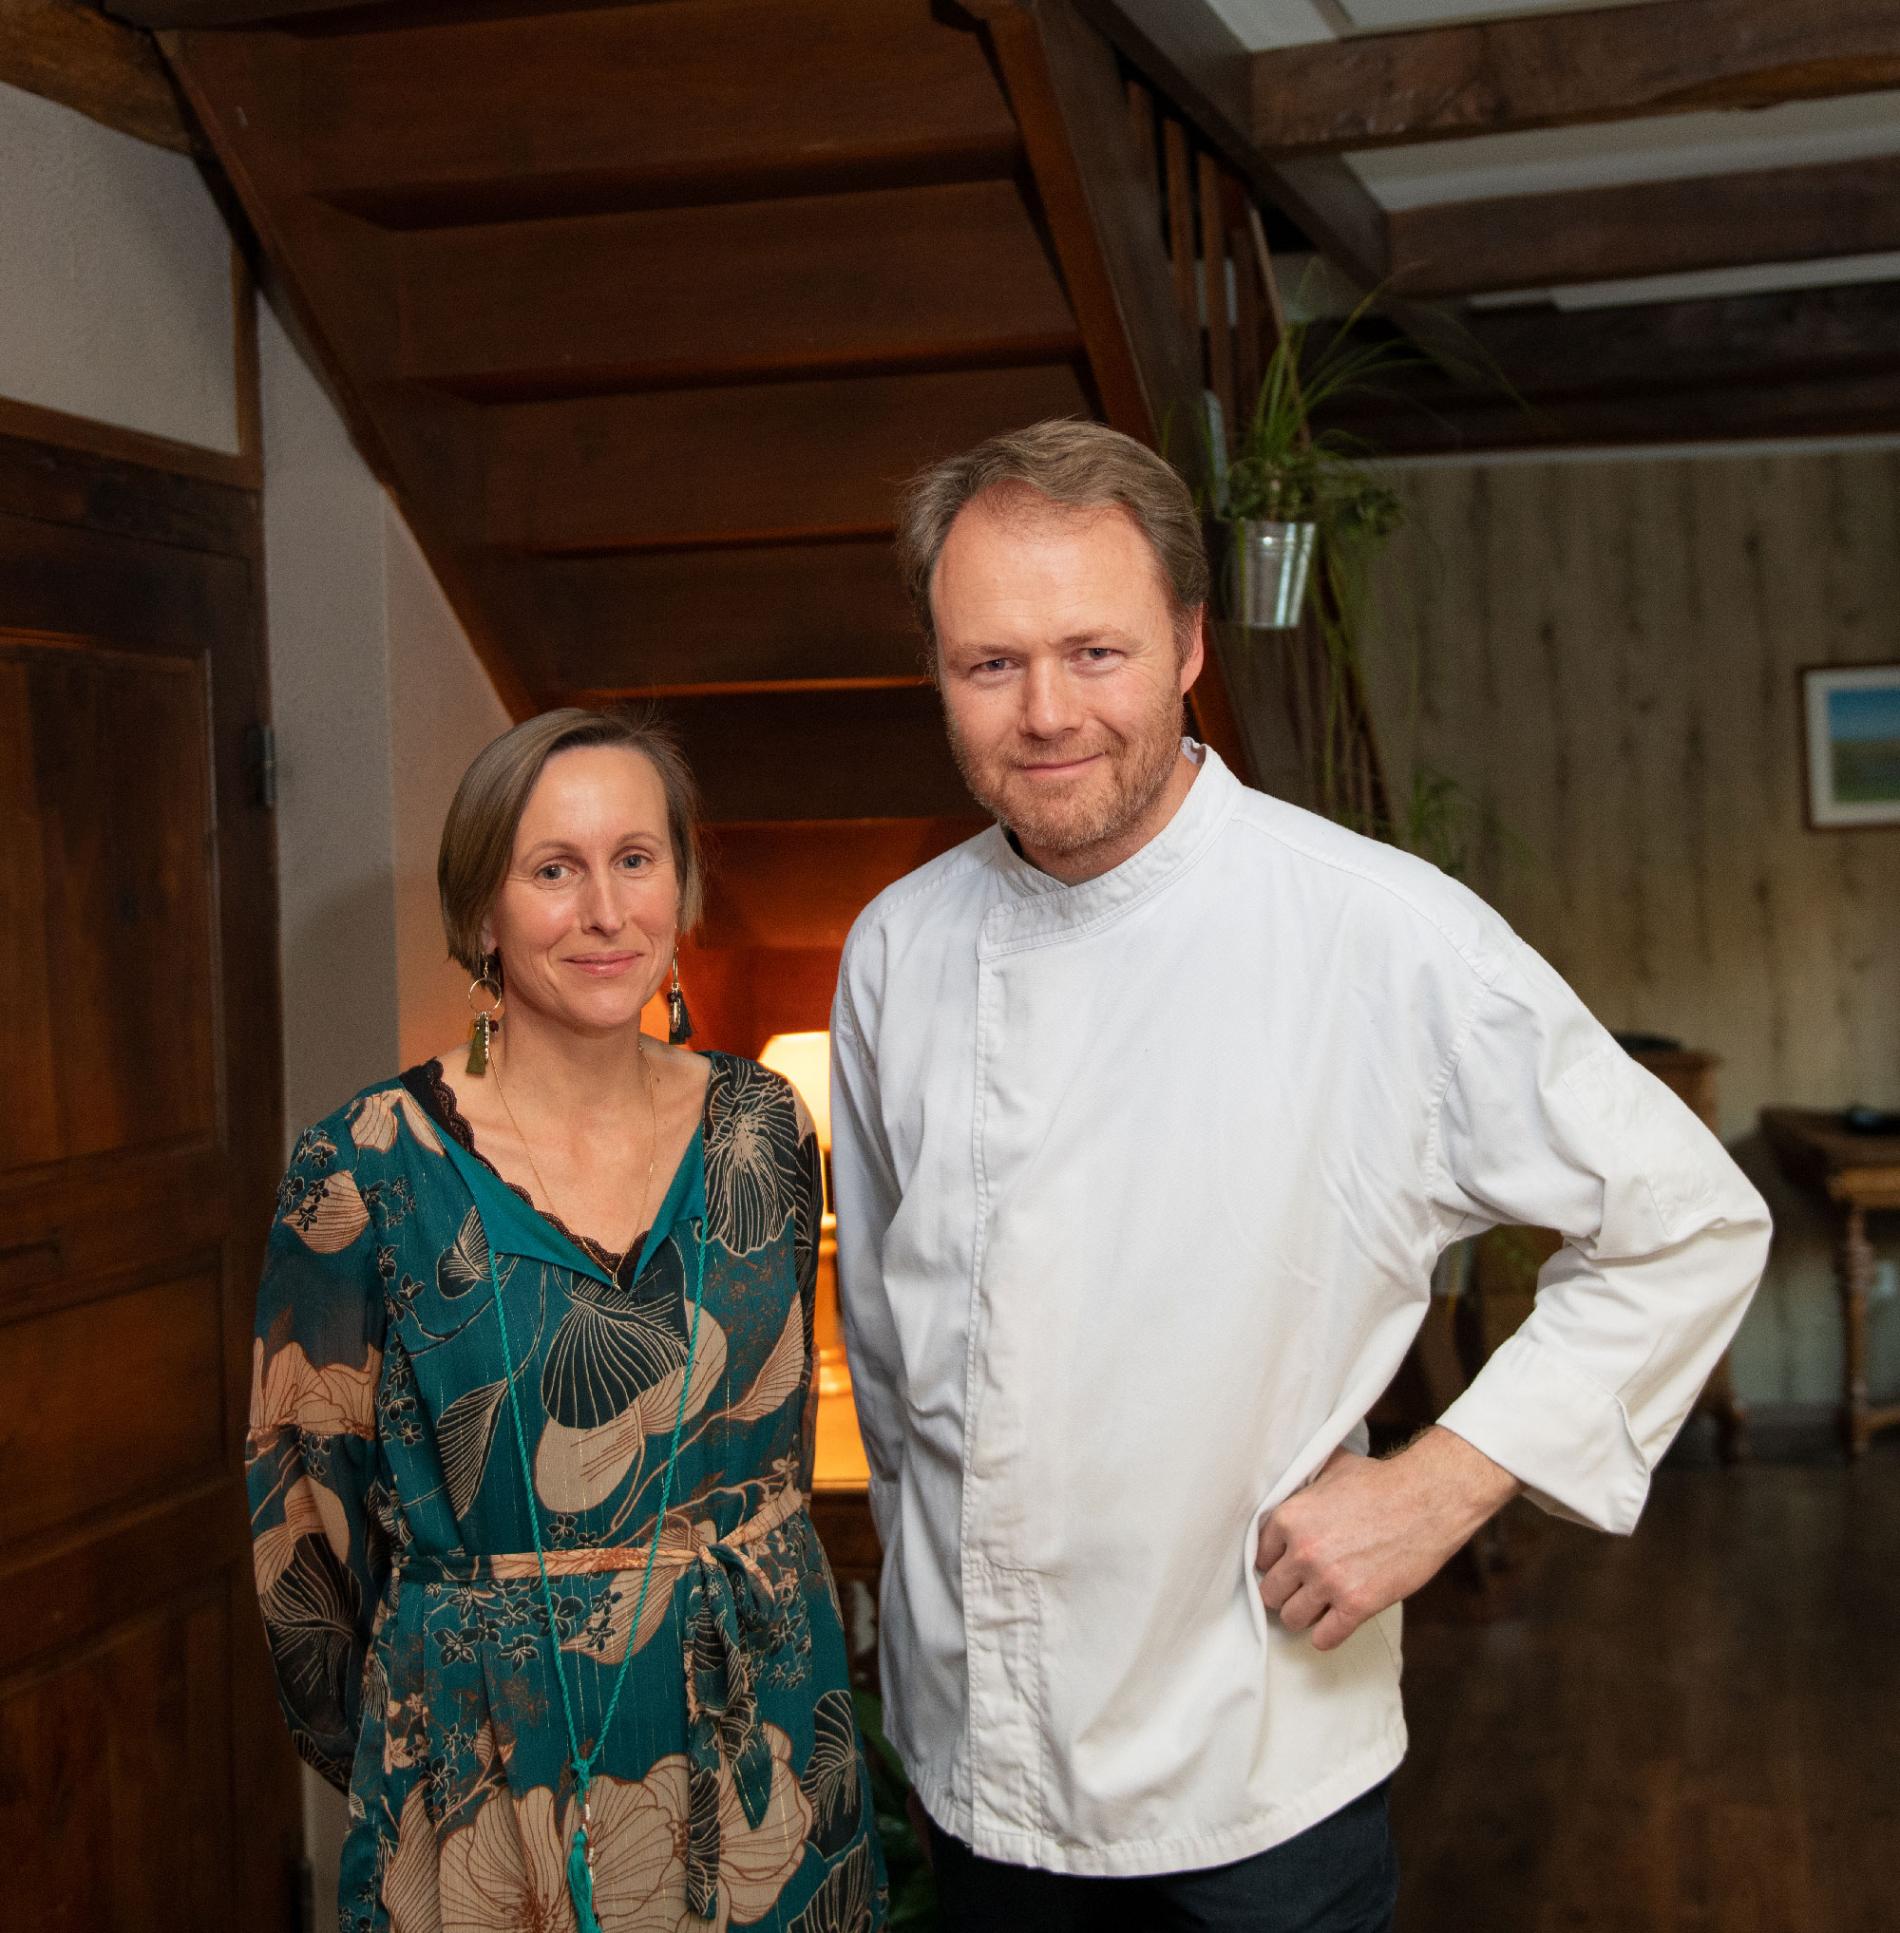 Since 2019, Elise at reception and Vianney in the kitchen welcome you to a rejuvenating stopover at Les Coudercous.